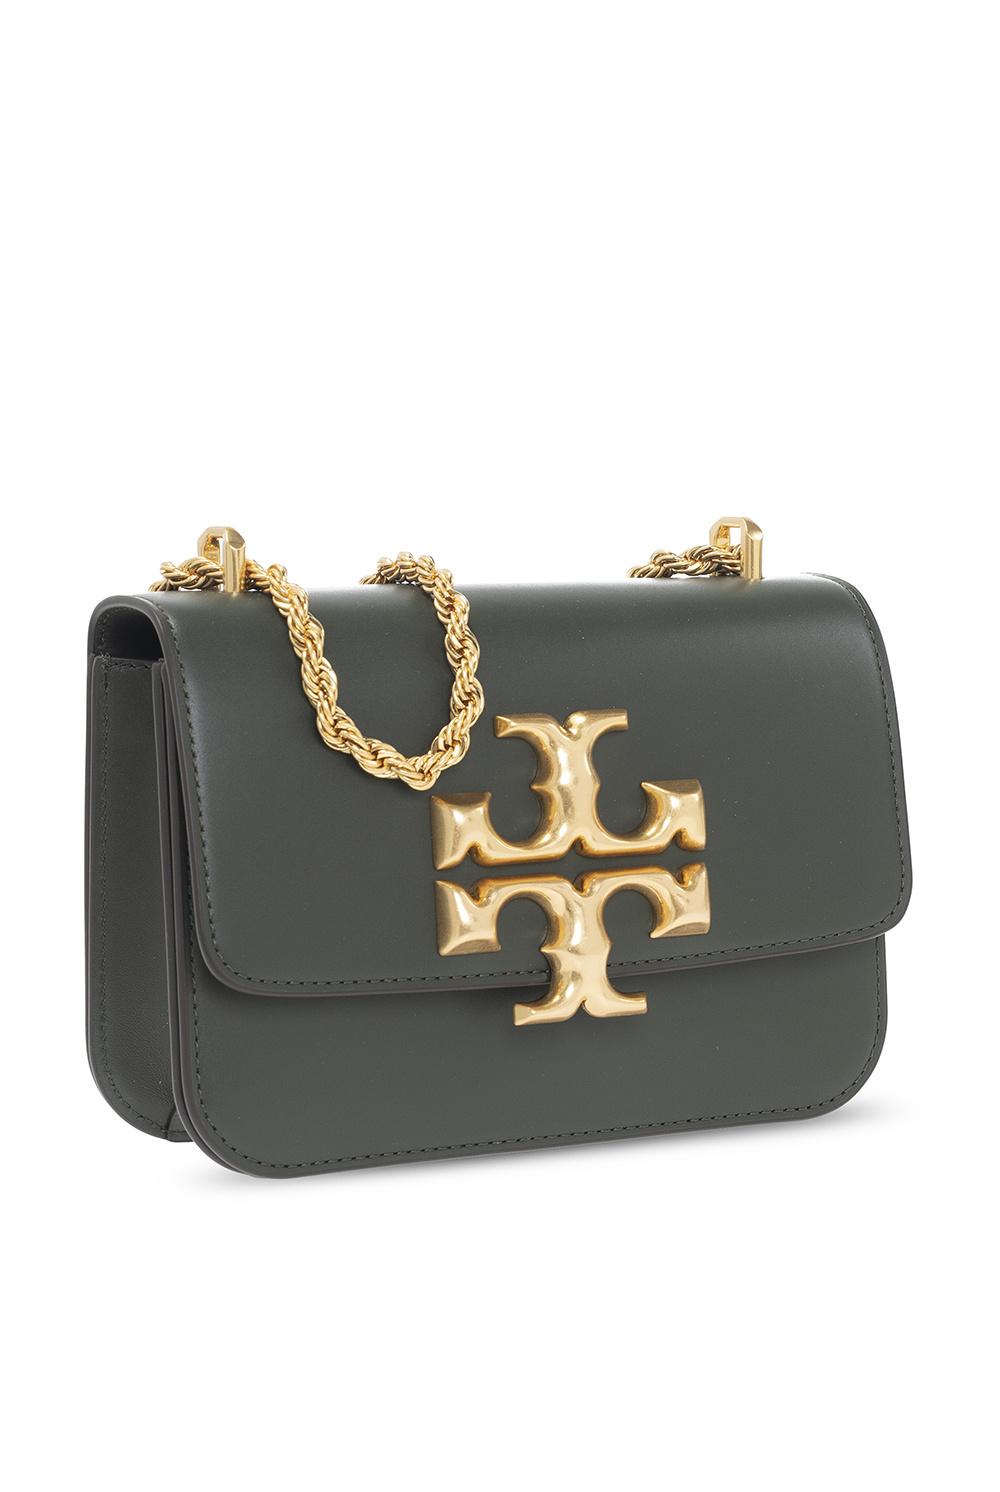 Tory Burch Eleanor Small Bag in Green | Lyst